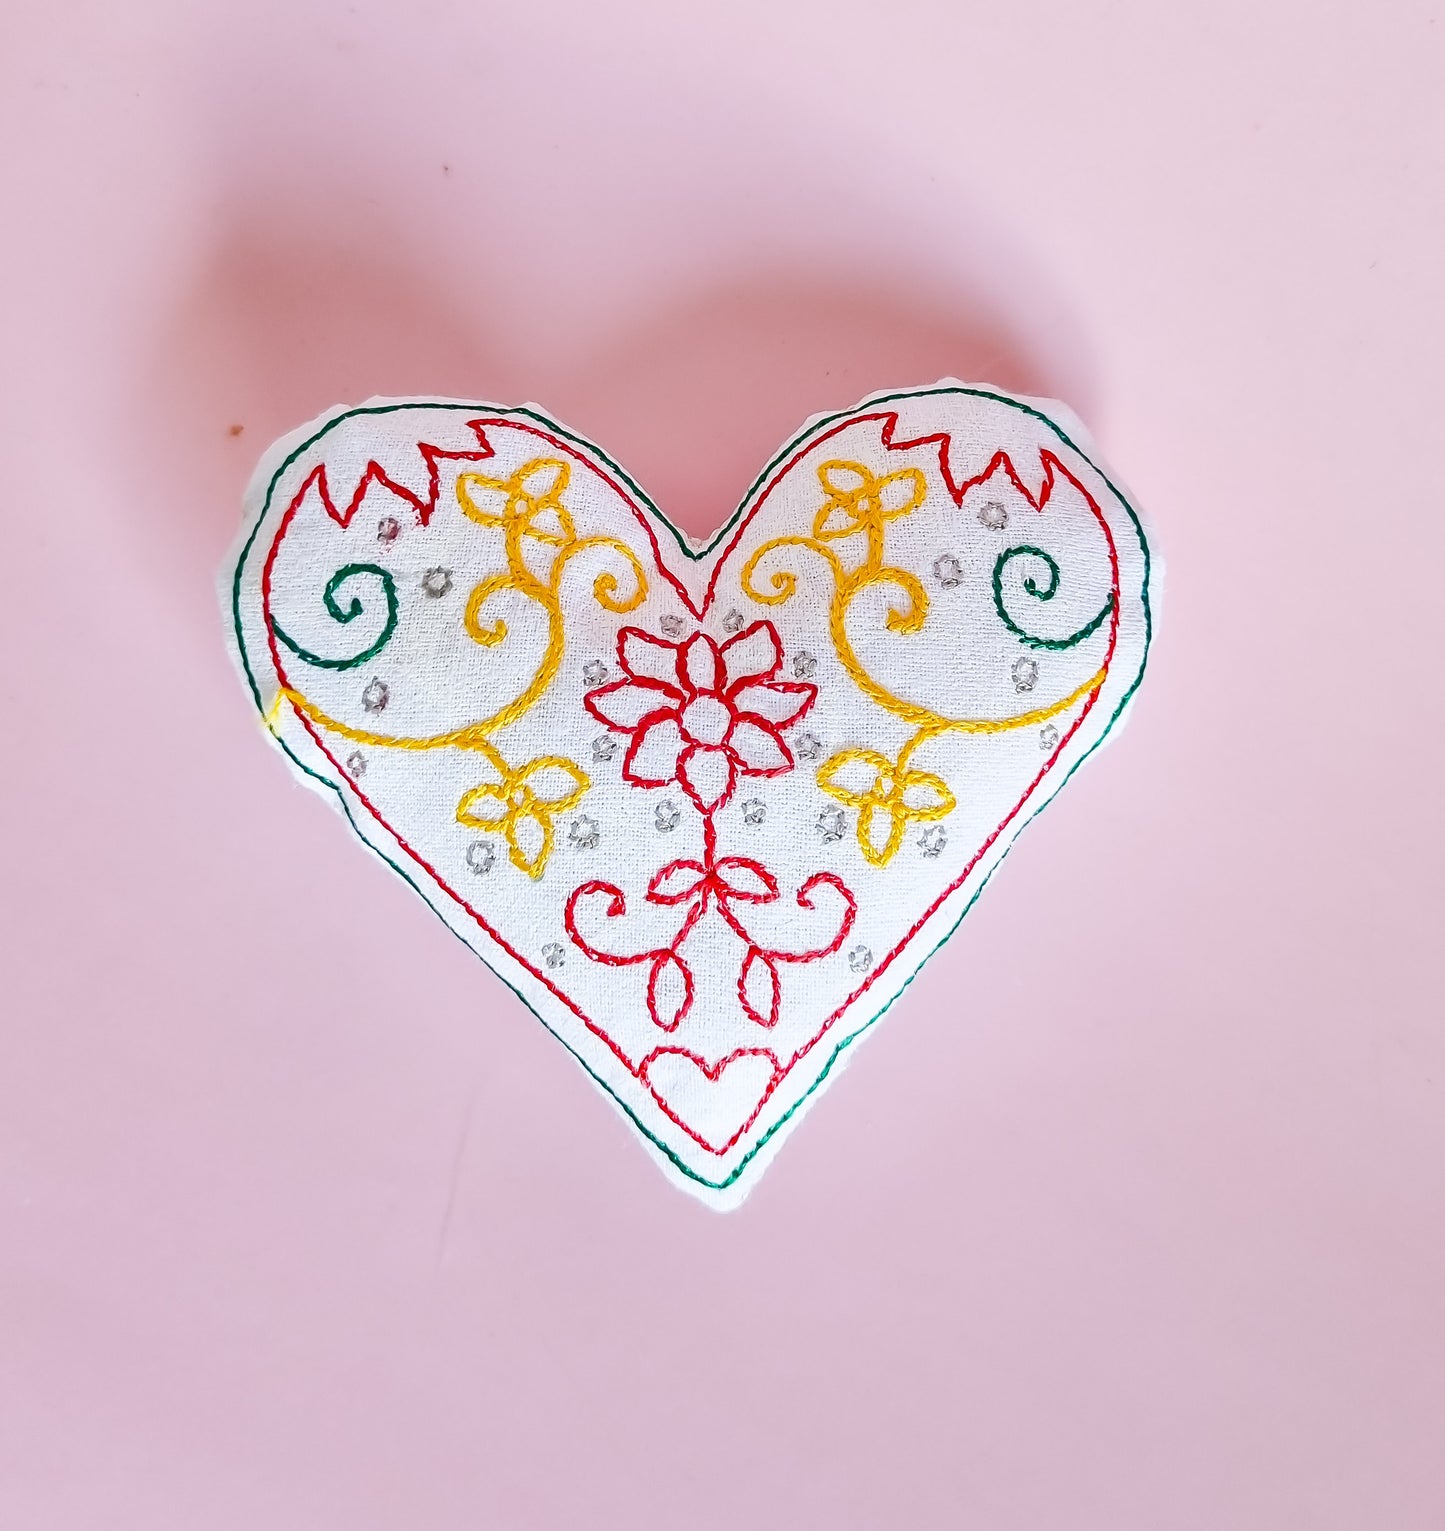 4 Hearts in the Hoop Embroidery design